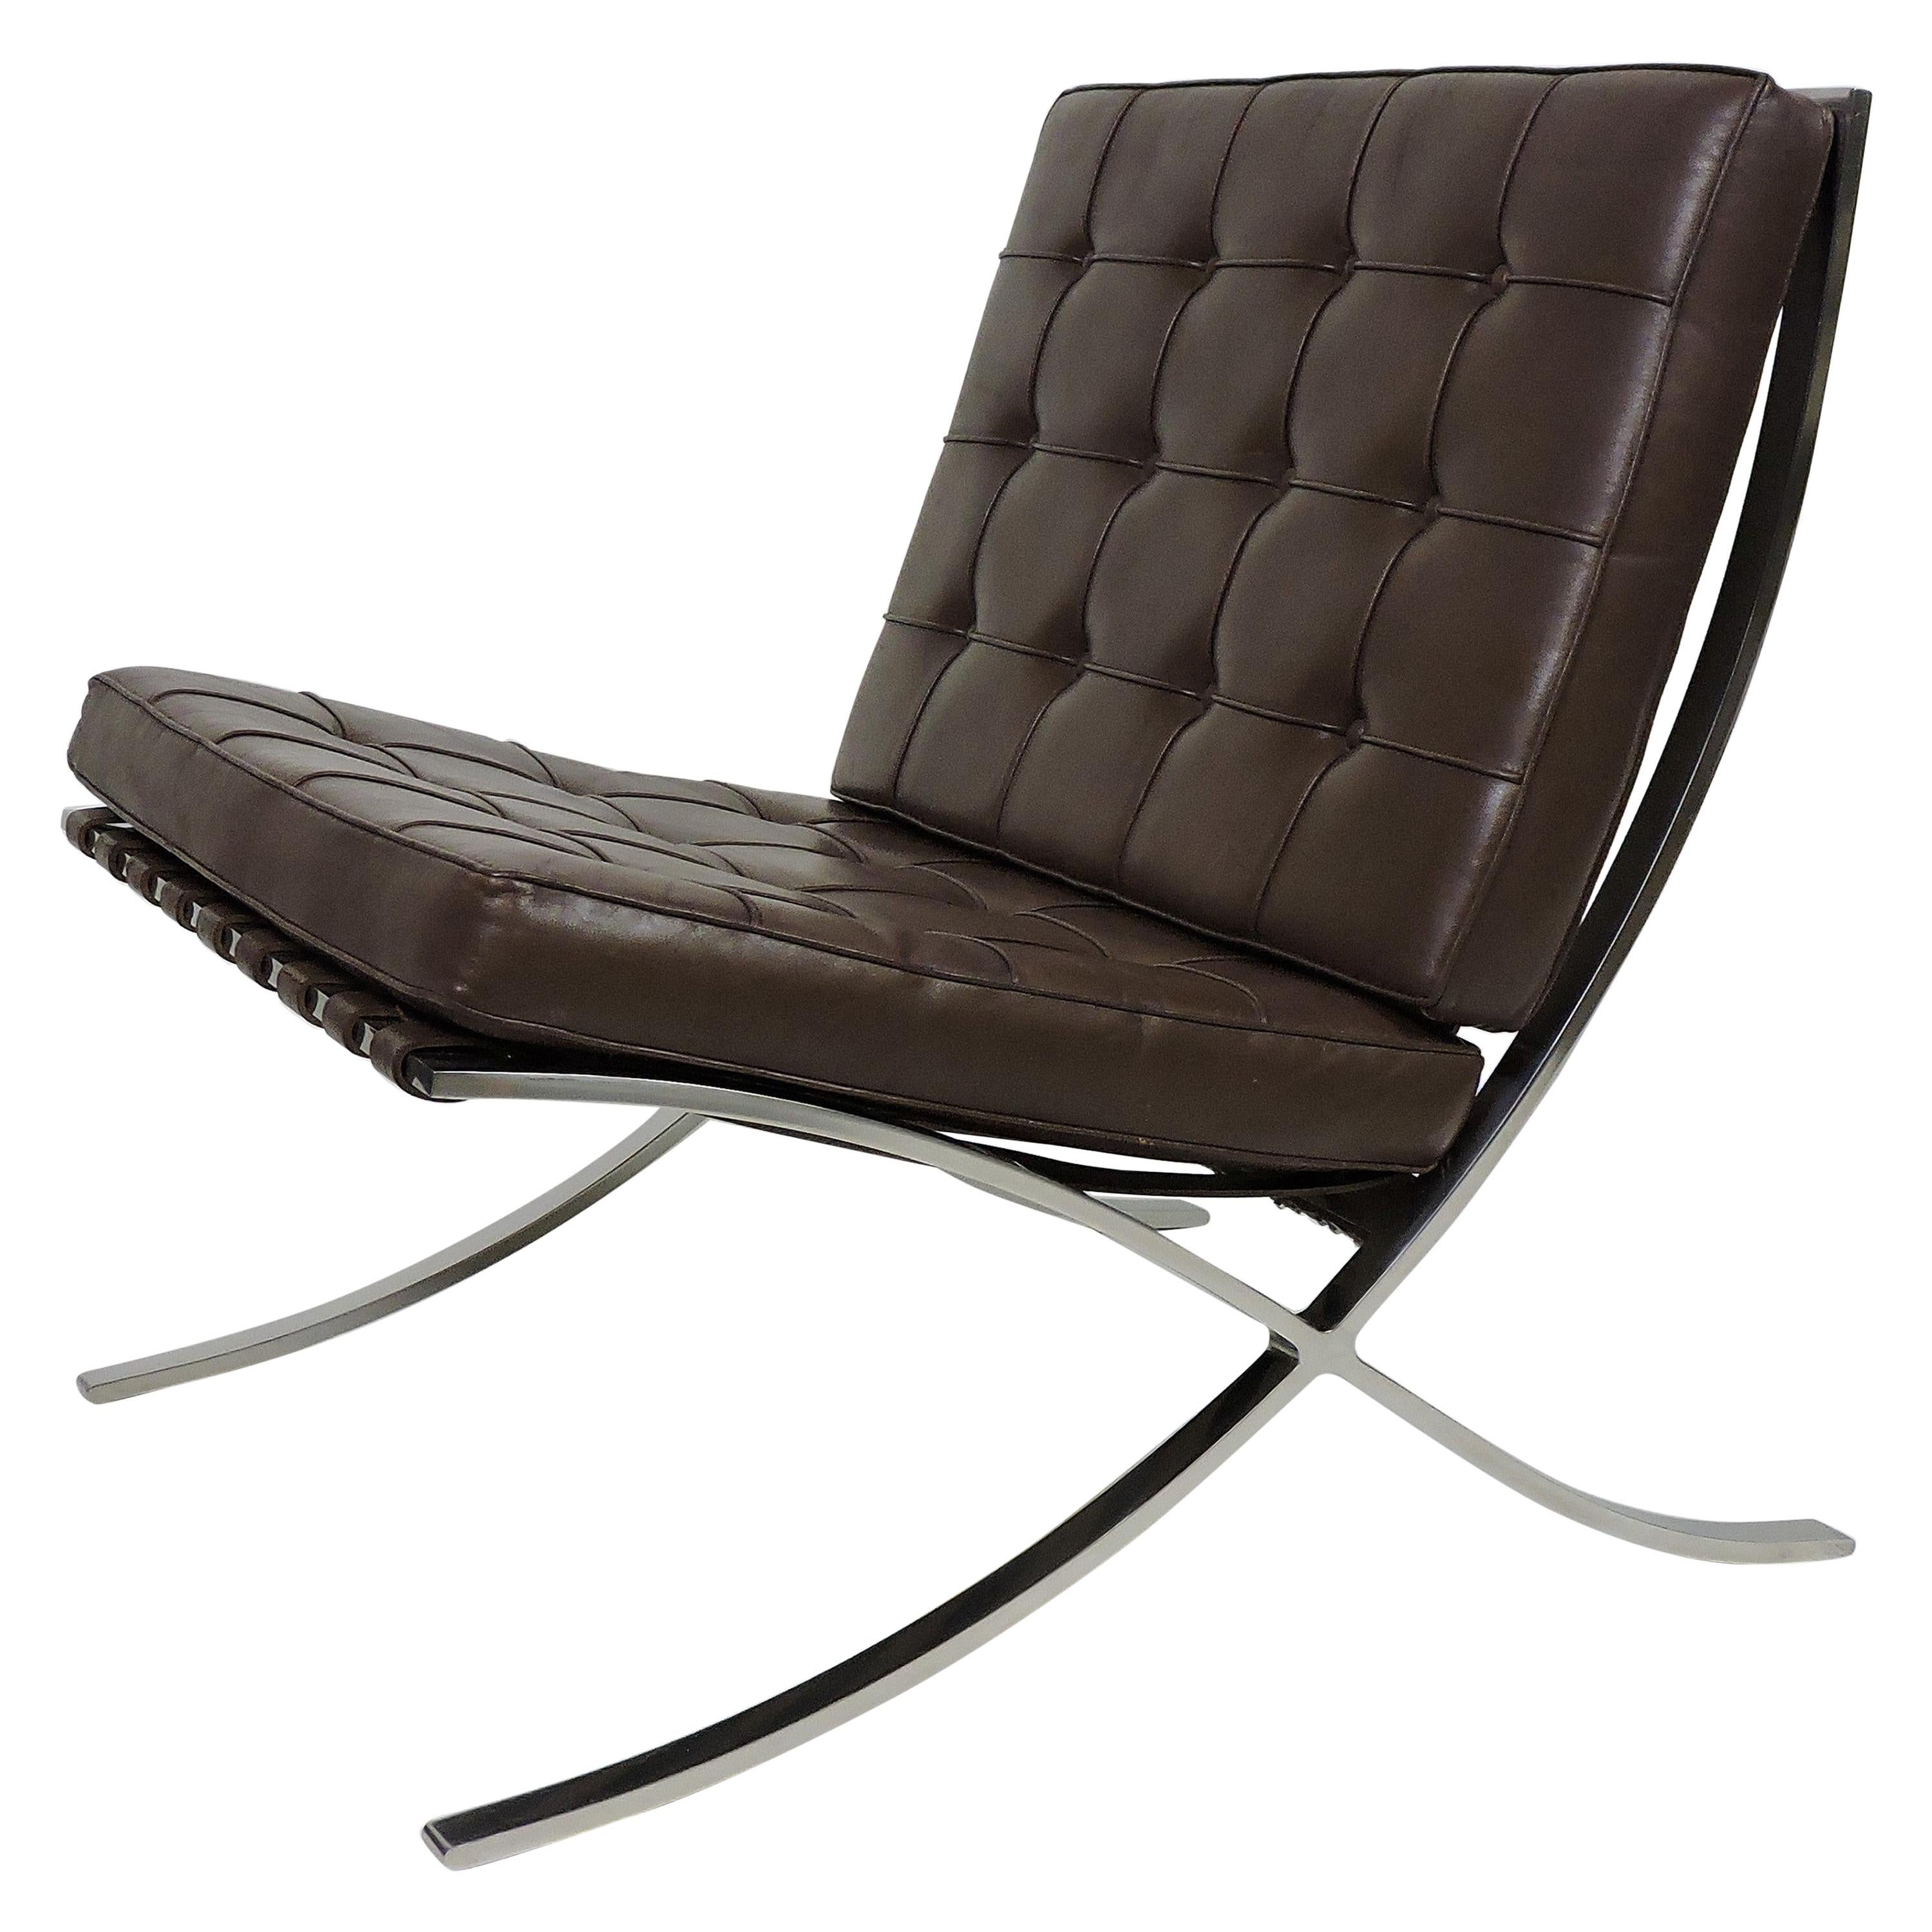 1960s Mies van der Rohe Knoll Bacelona Stainless Steel and Leather Chair 